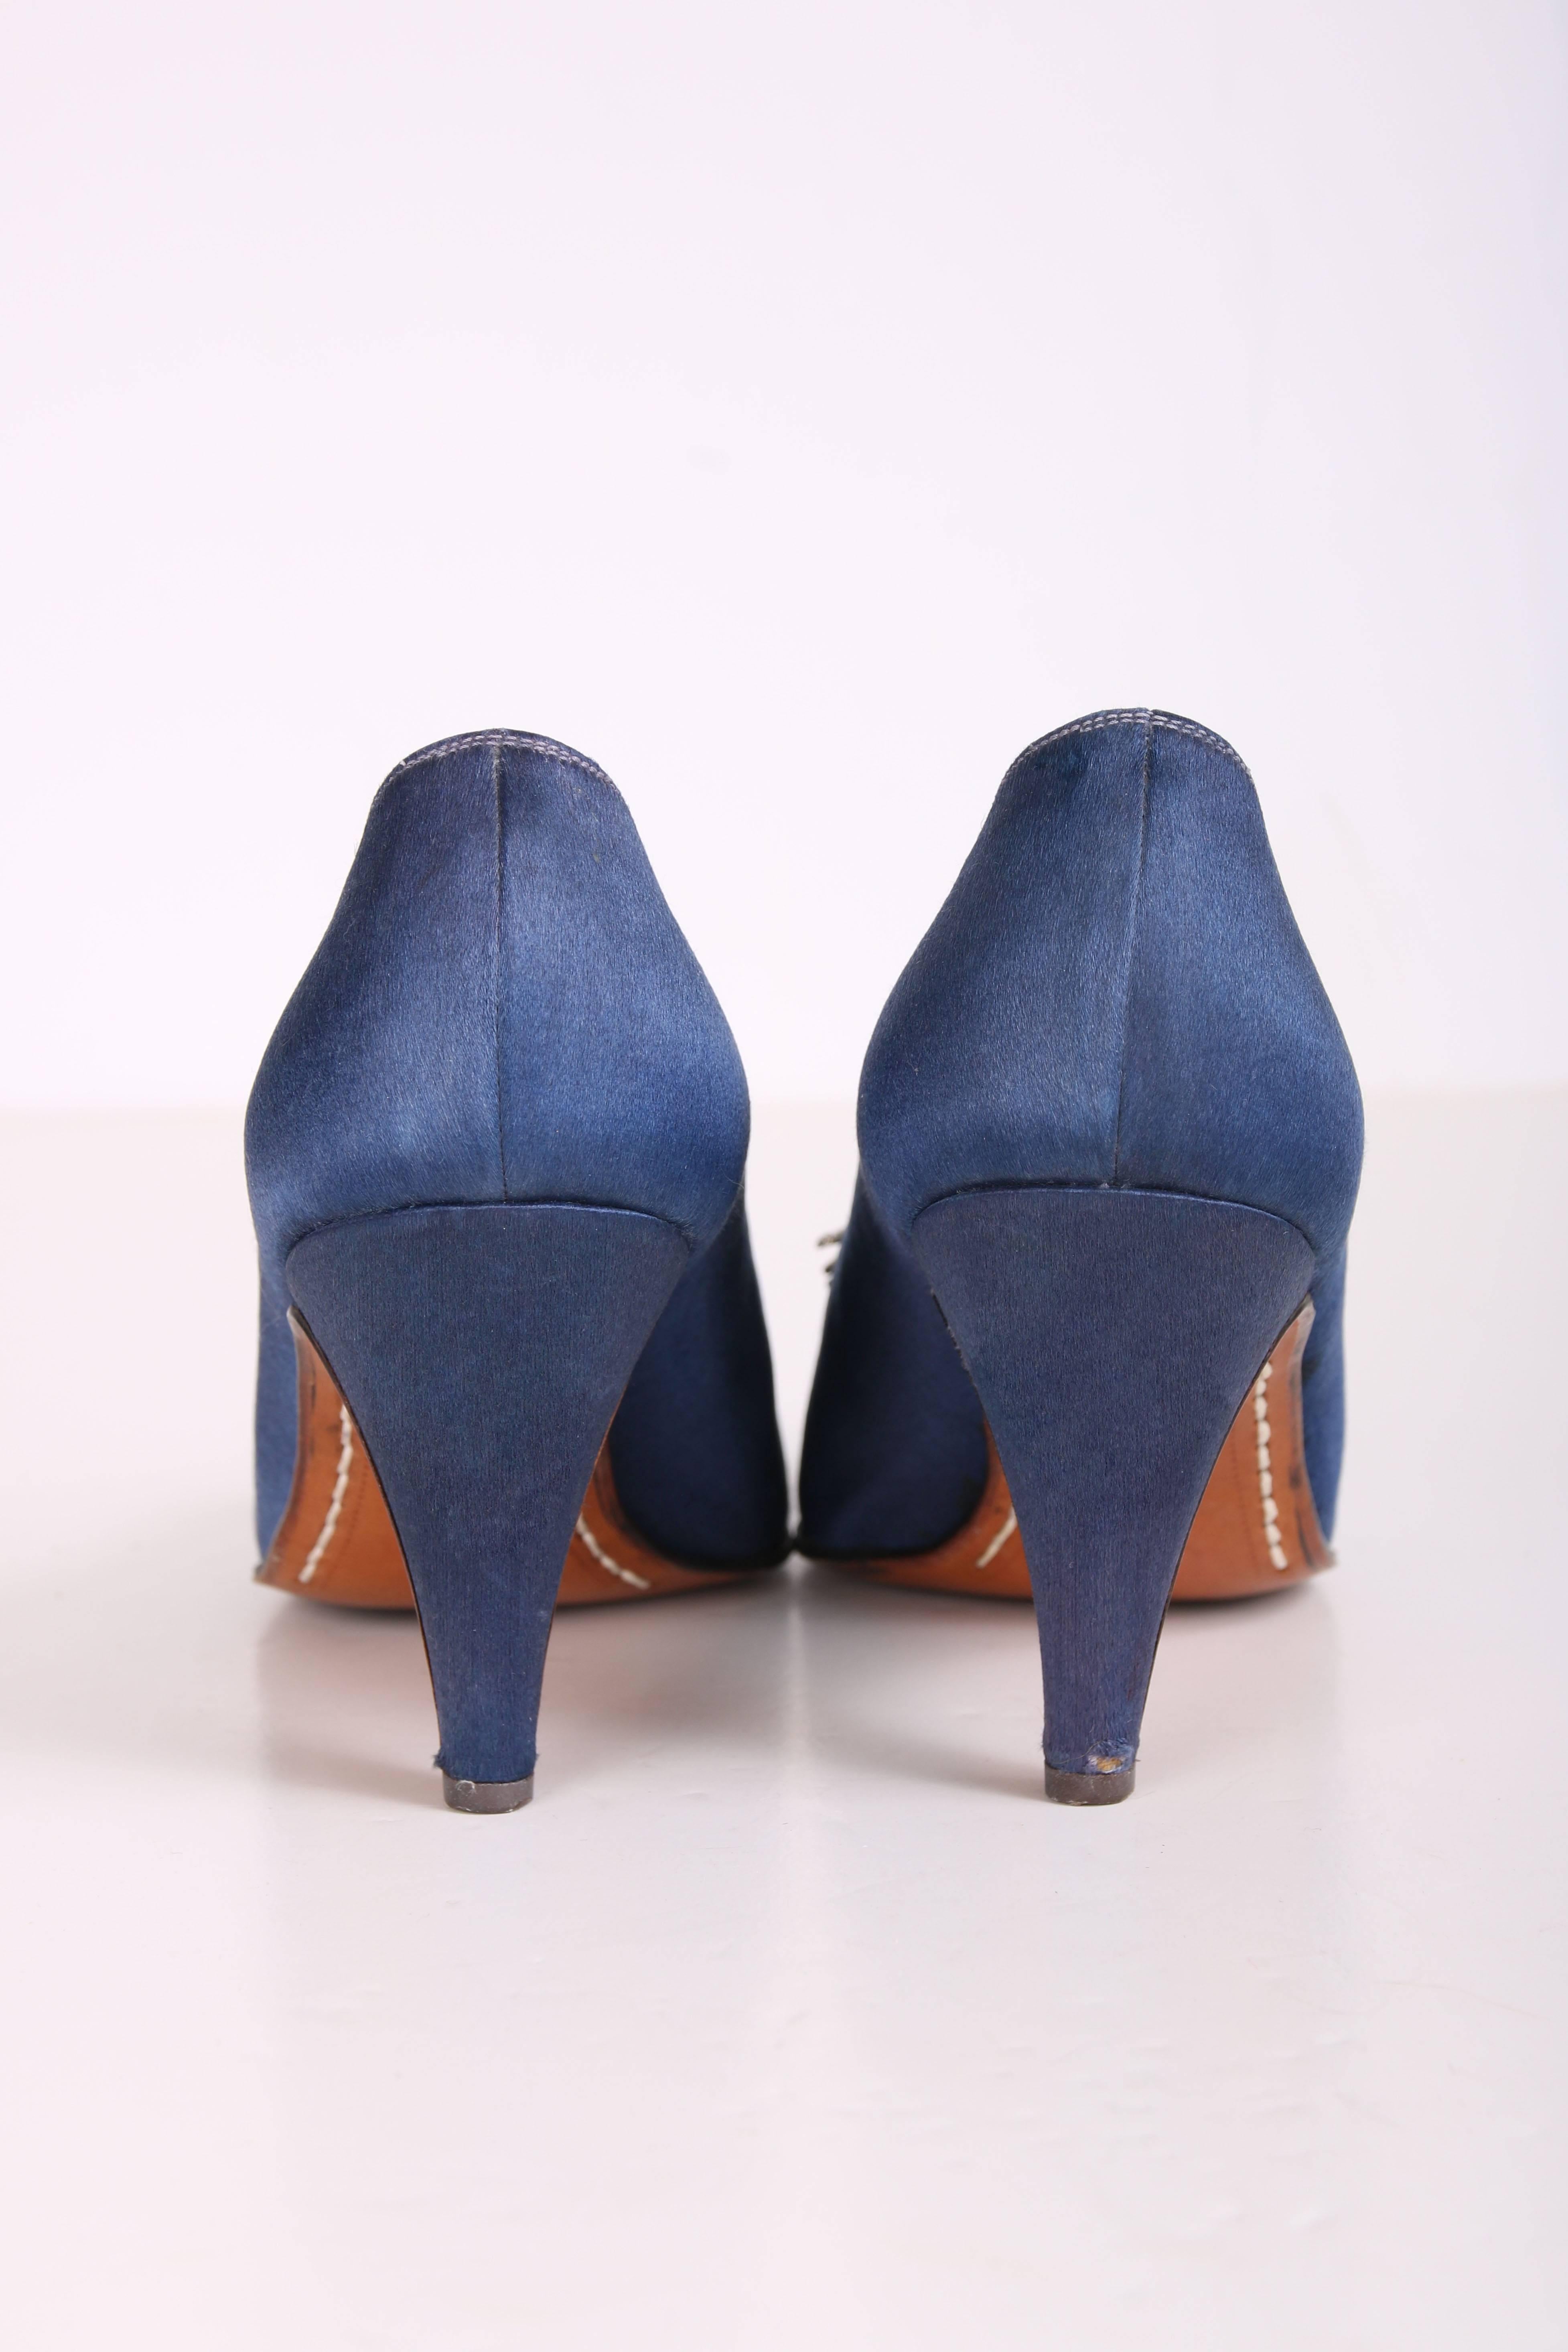 Gray Helene Arpels Custom Blue Silk Pumps with Jeweled Adornment at Toe